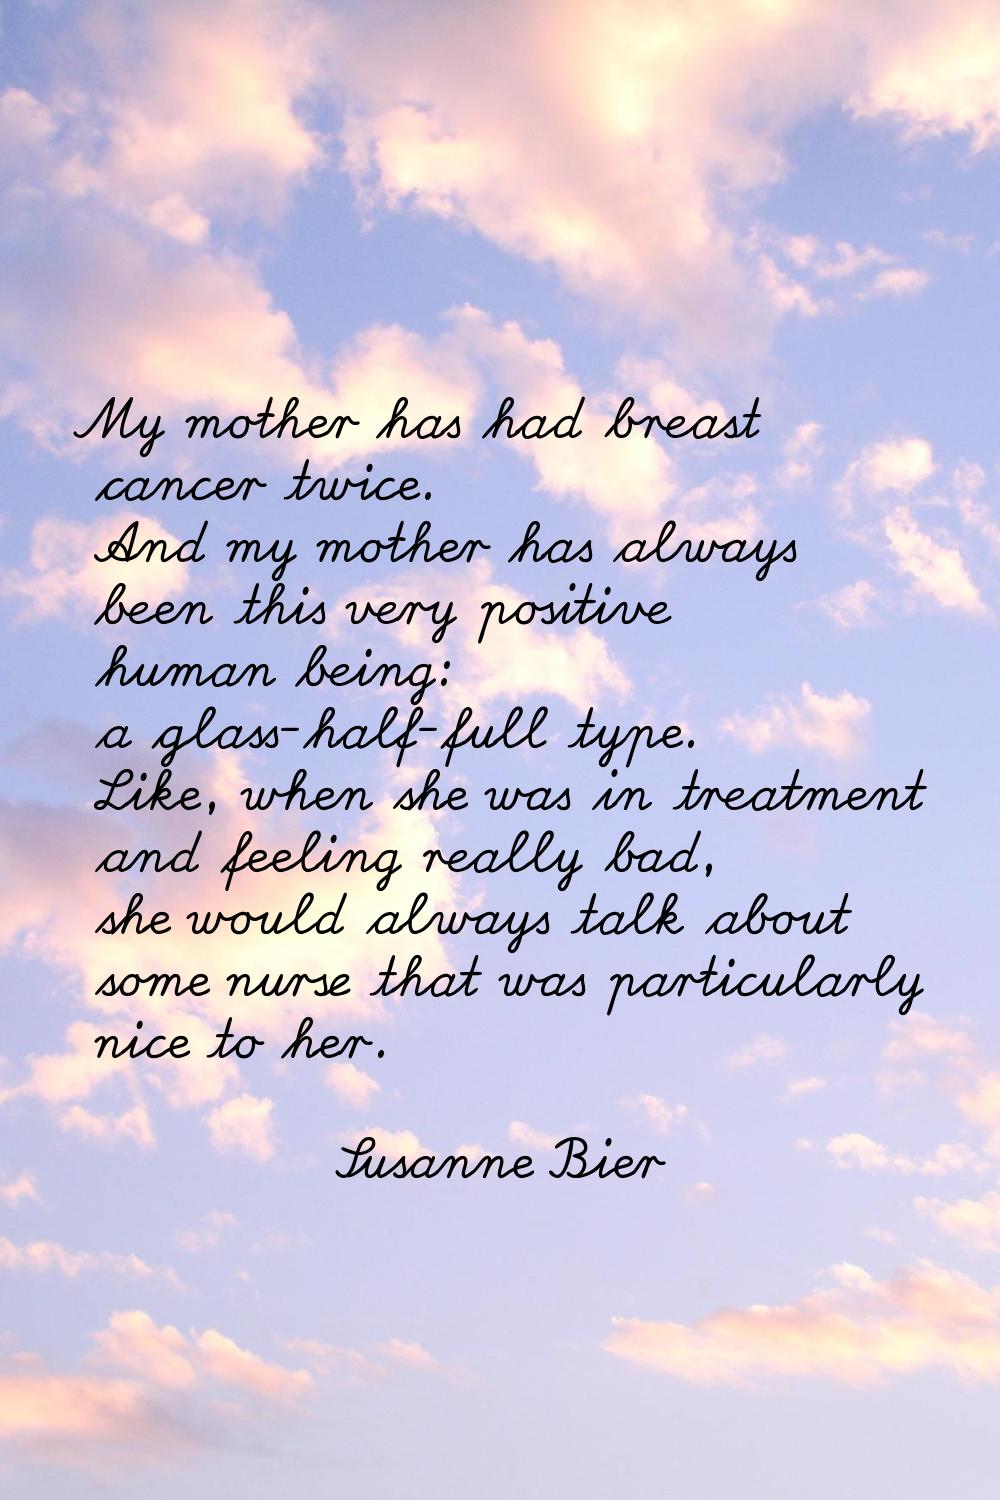 My mother has had breast cancer twice. And my mother has always been this very positive human being